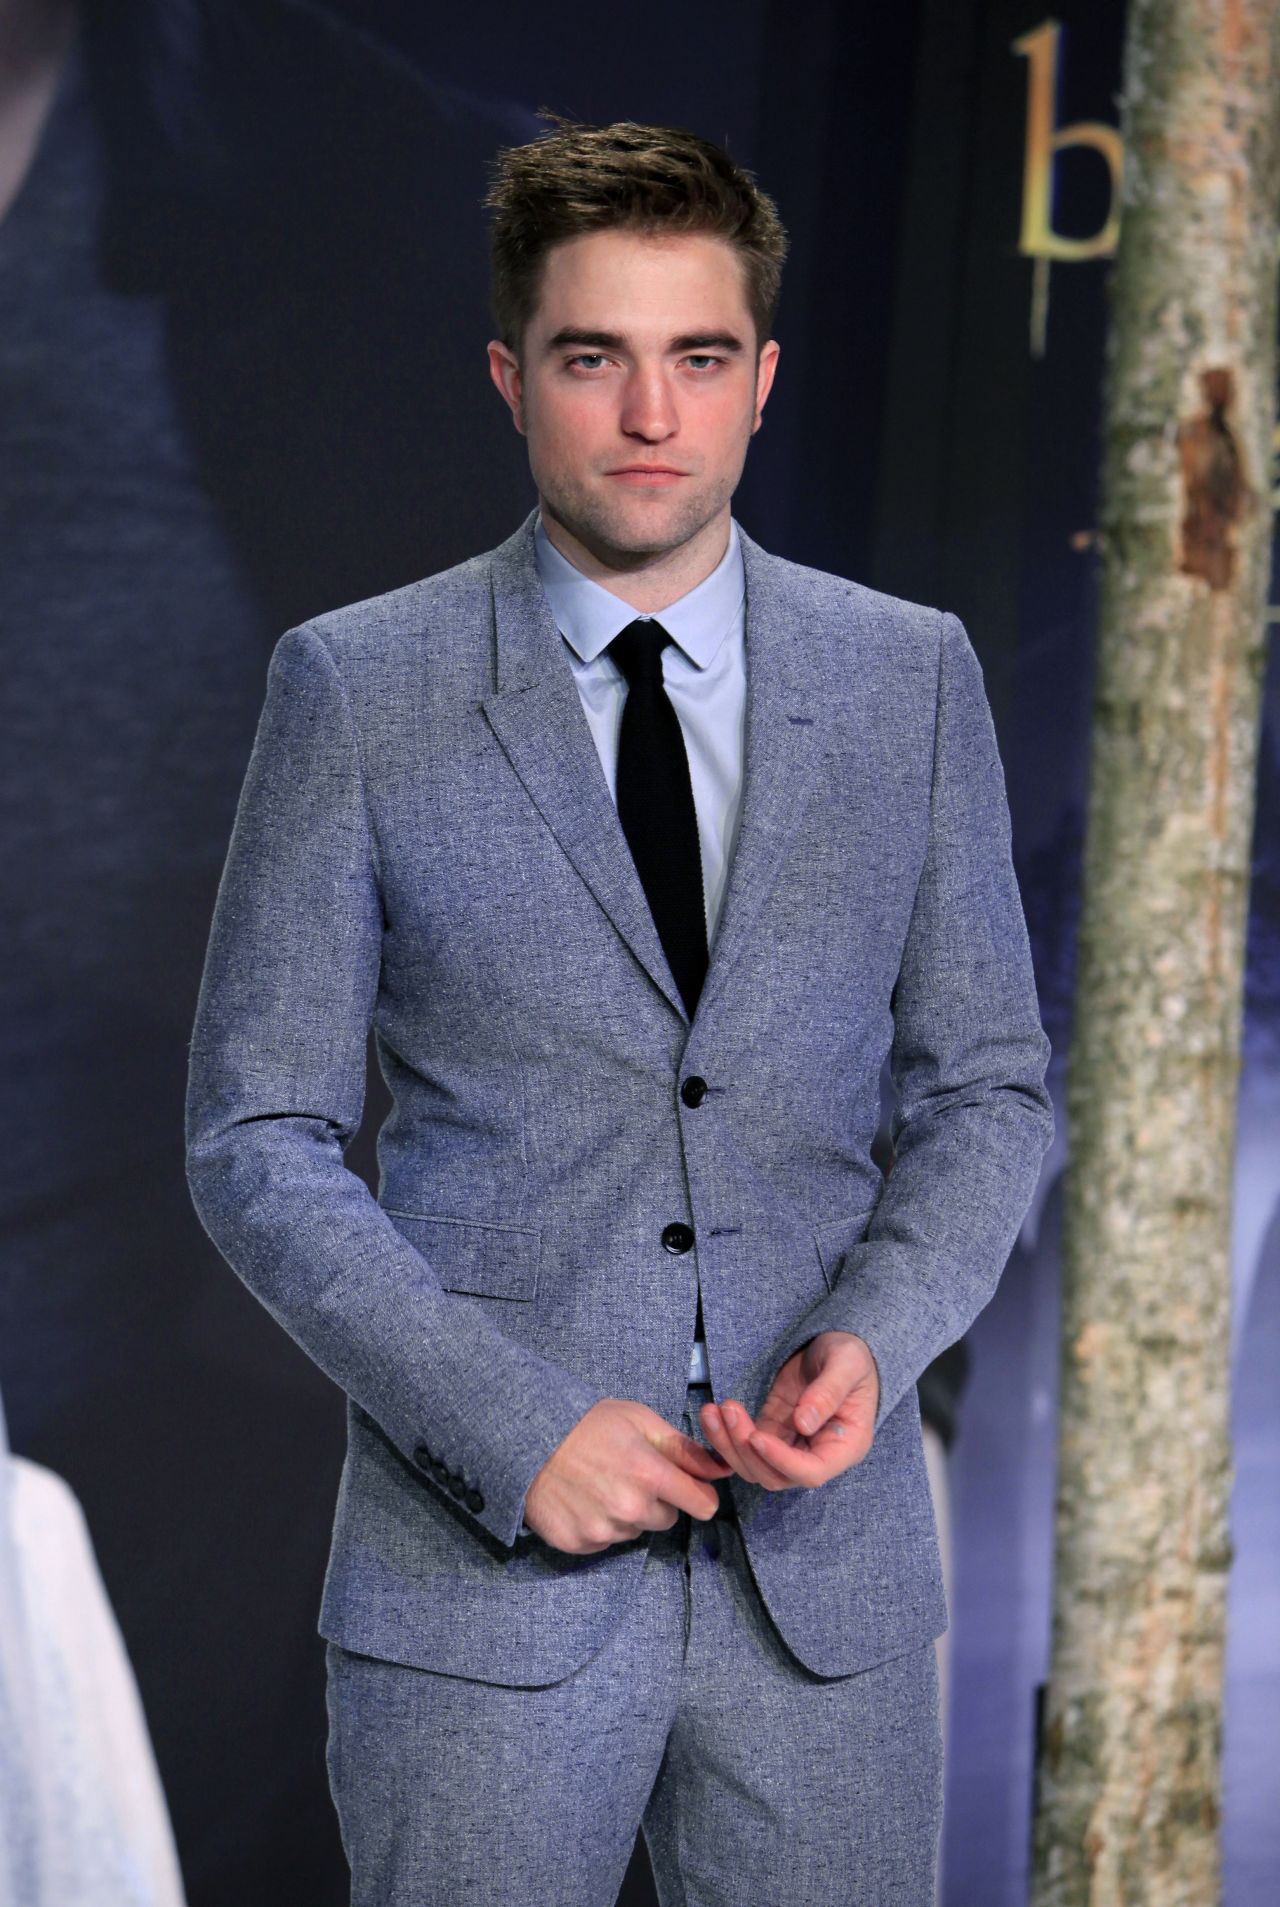 Author Stephenie Meyer can thank Robert Pattinson for bringing her character to life, but perhaps not for what he said in 2008. During an interview, the actor <a href="http://filmdrunk.uproxx.com/2008/11/twilight-queer-ftw" target="_blank" target="_blank">was quoted as saying</a>, "Like some things about Edward are so specific, I was just convinced, like, 'This woman is mad. She's completely mad, and she's in love with her own fictional creation.' And sometimes you would feel uncomfortable reading this thing."